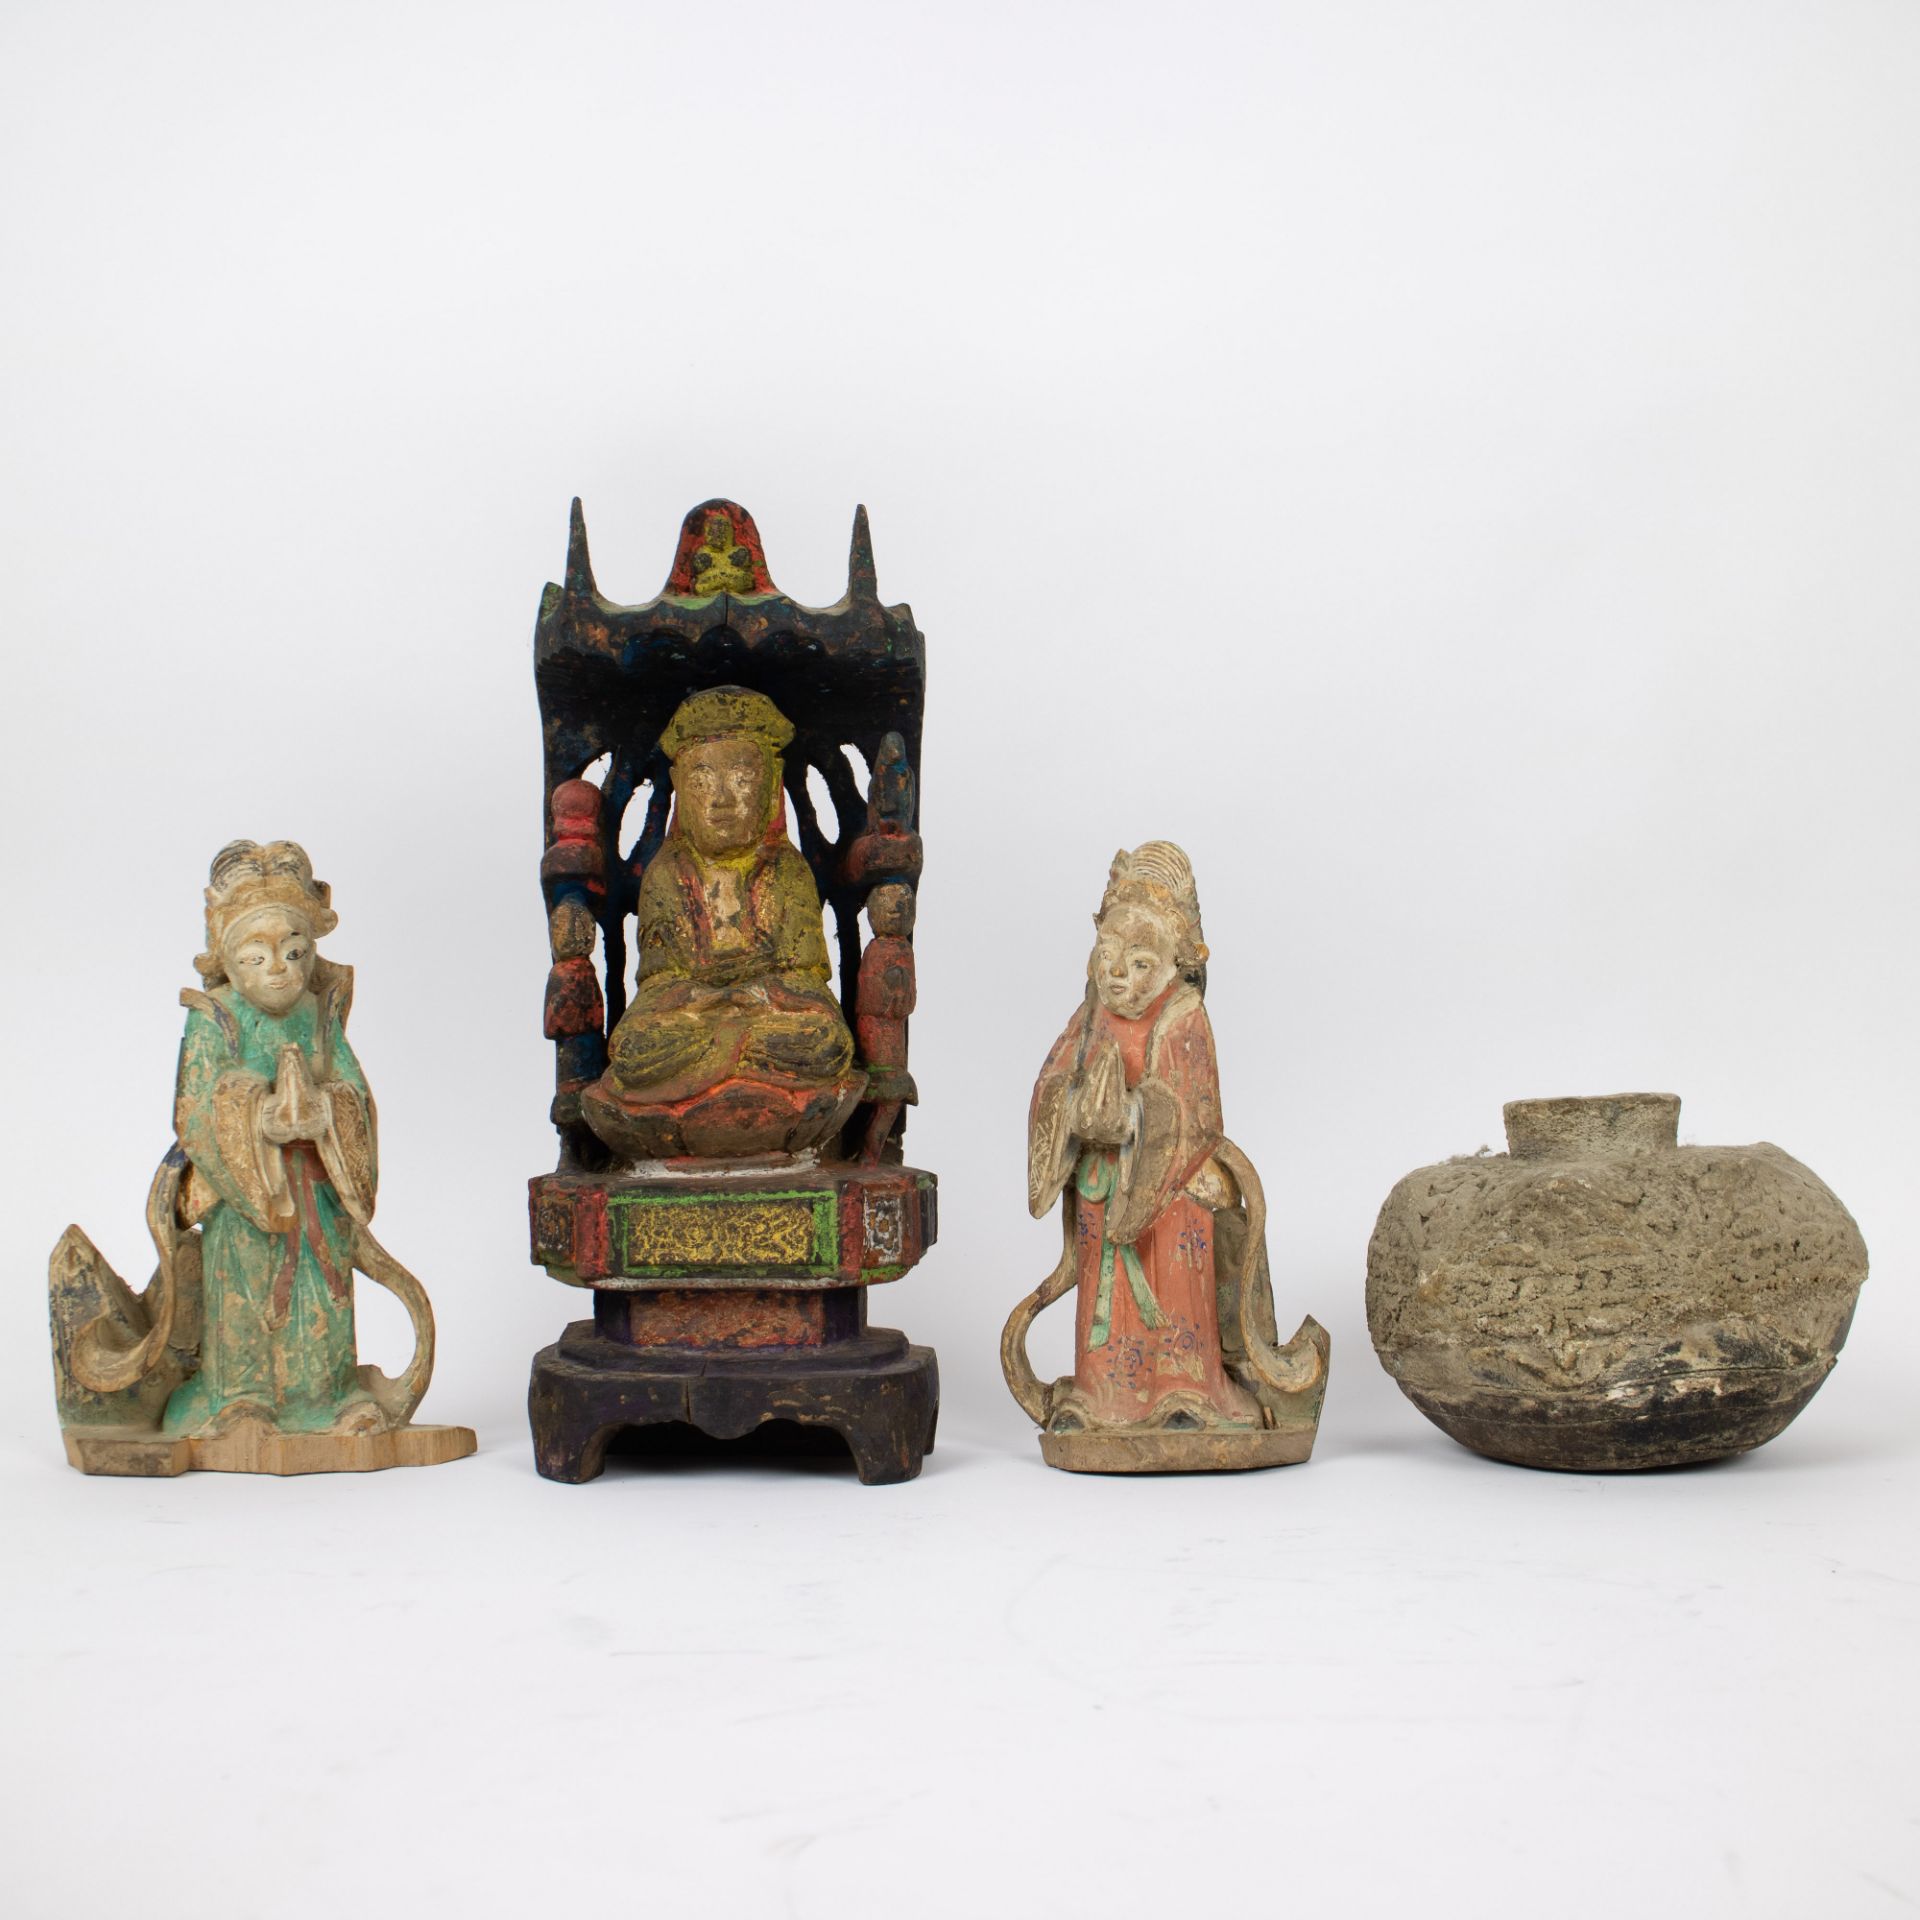 3 polychrome wood carving figurines and a stoneware vessel